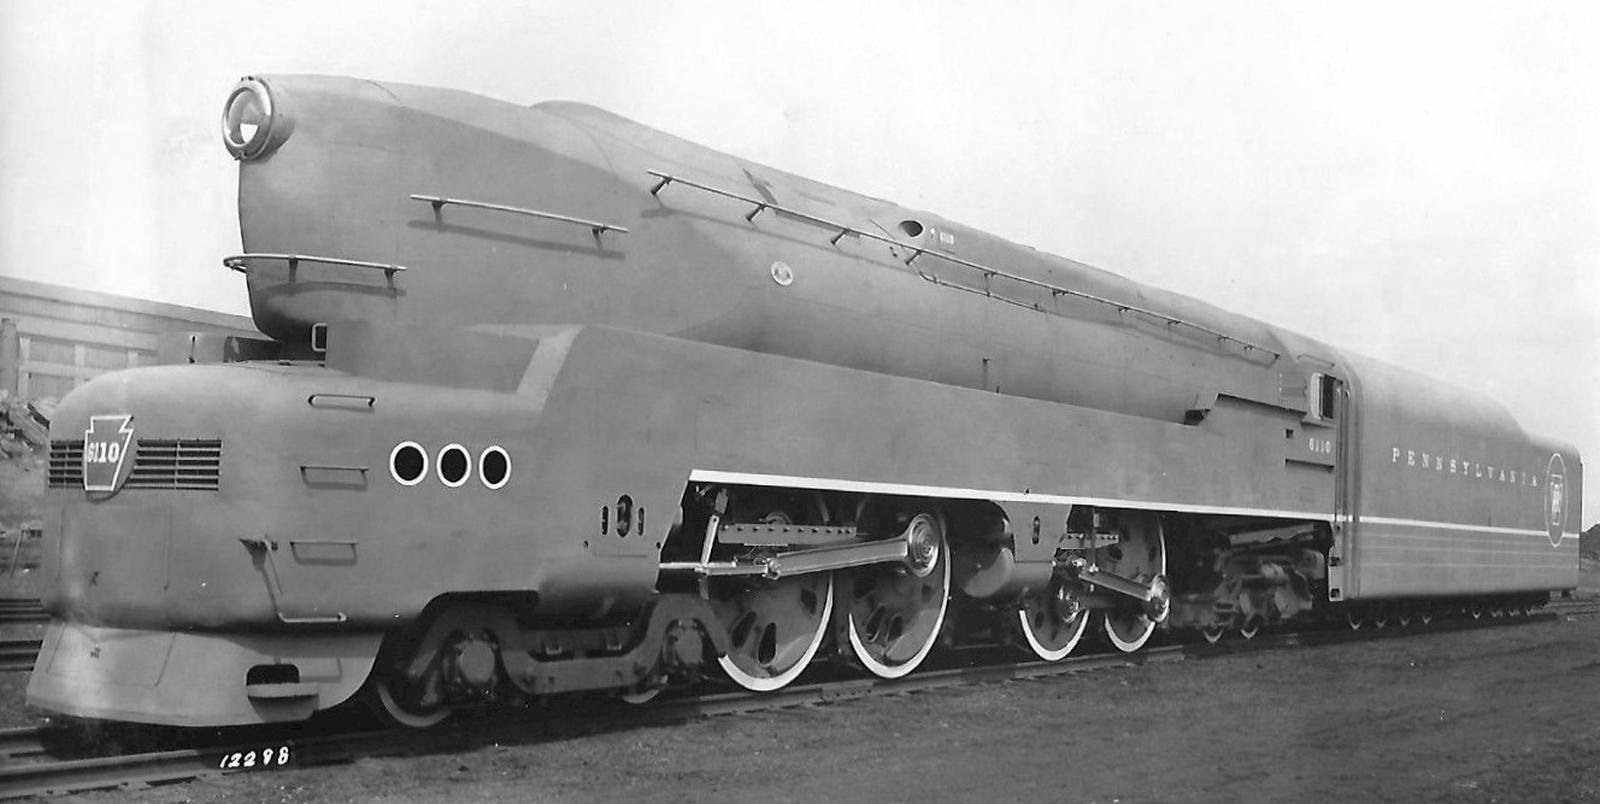 The first prototype No. 6110